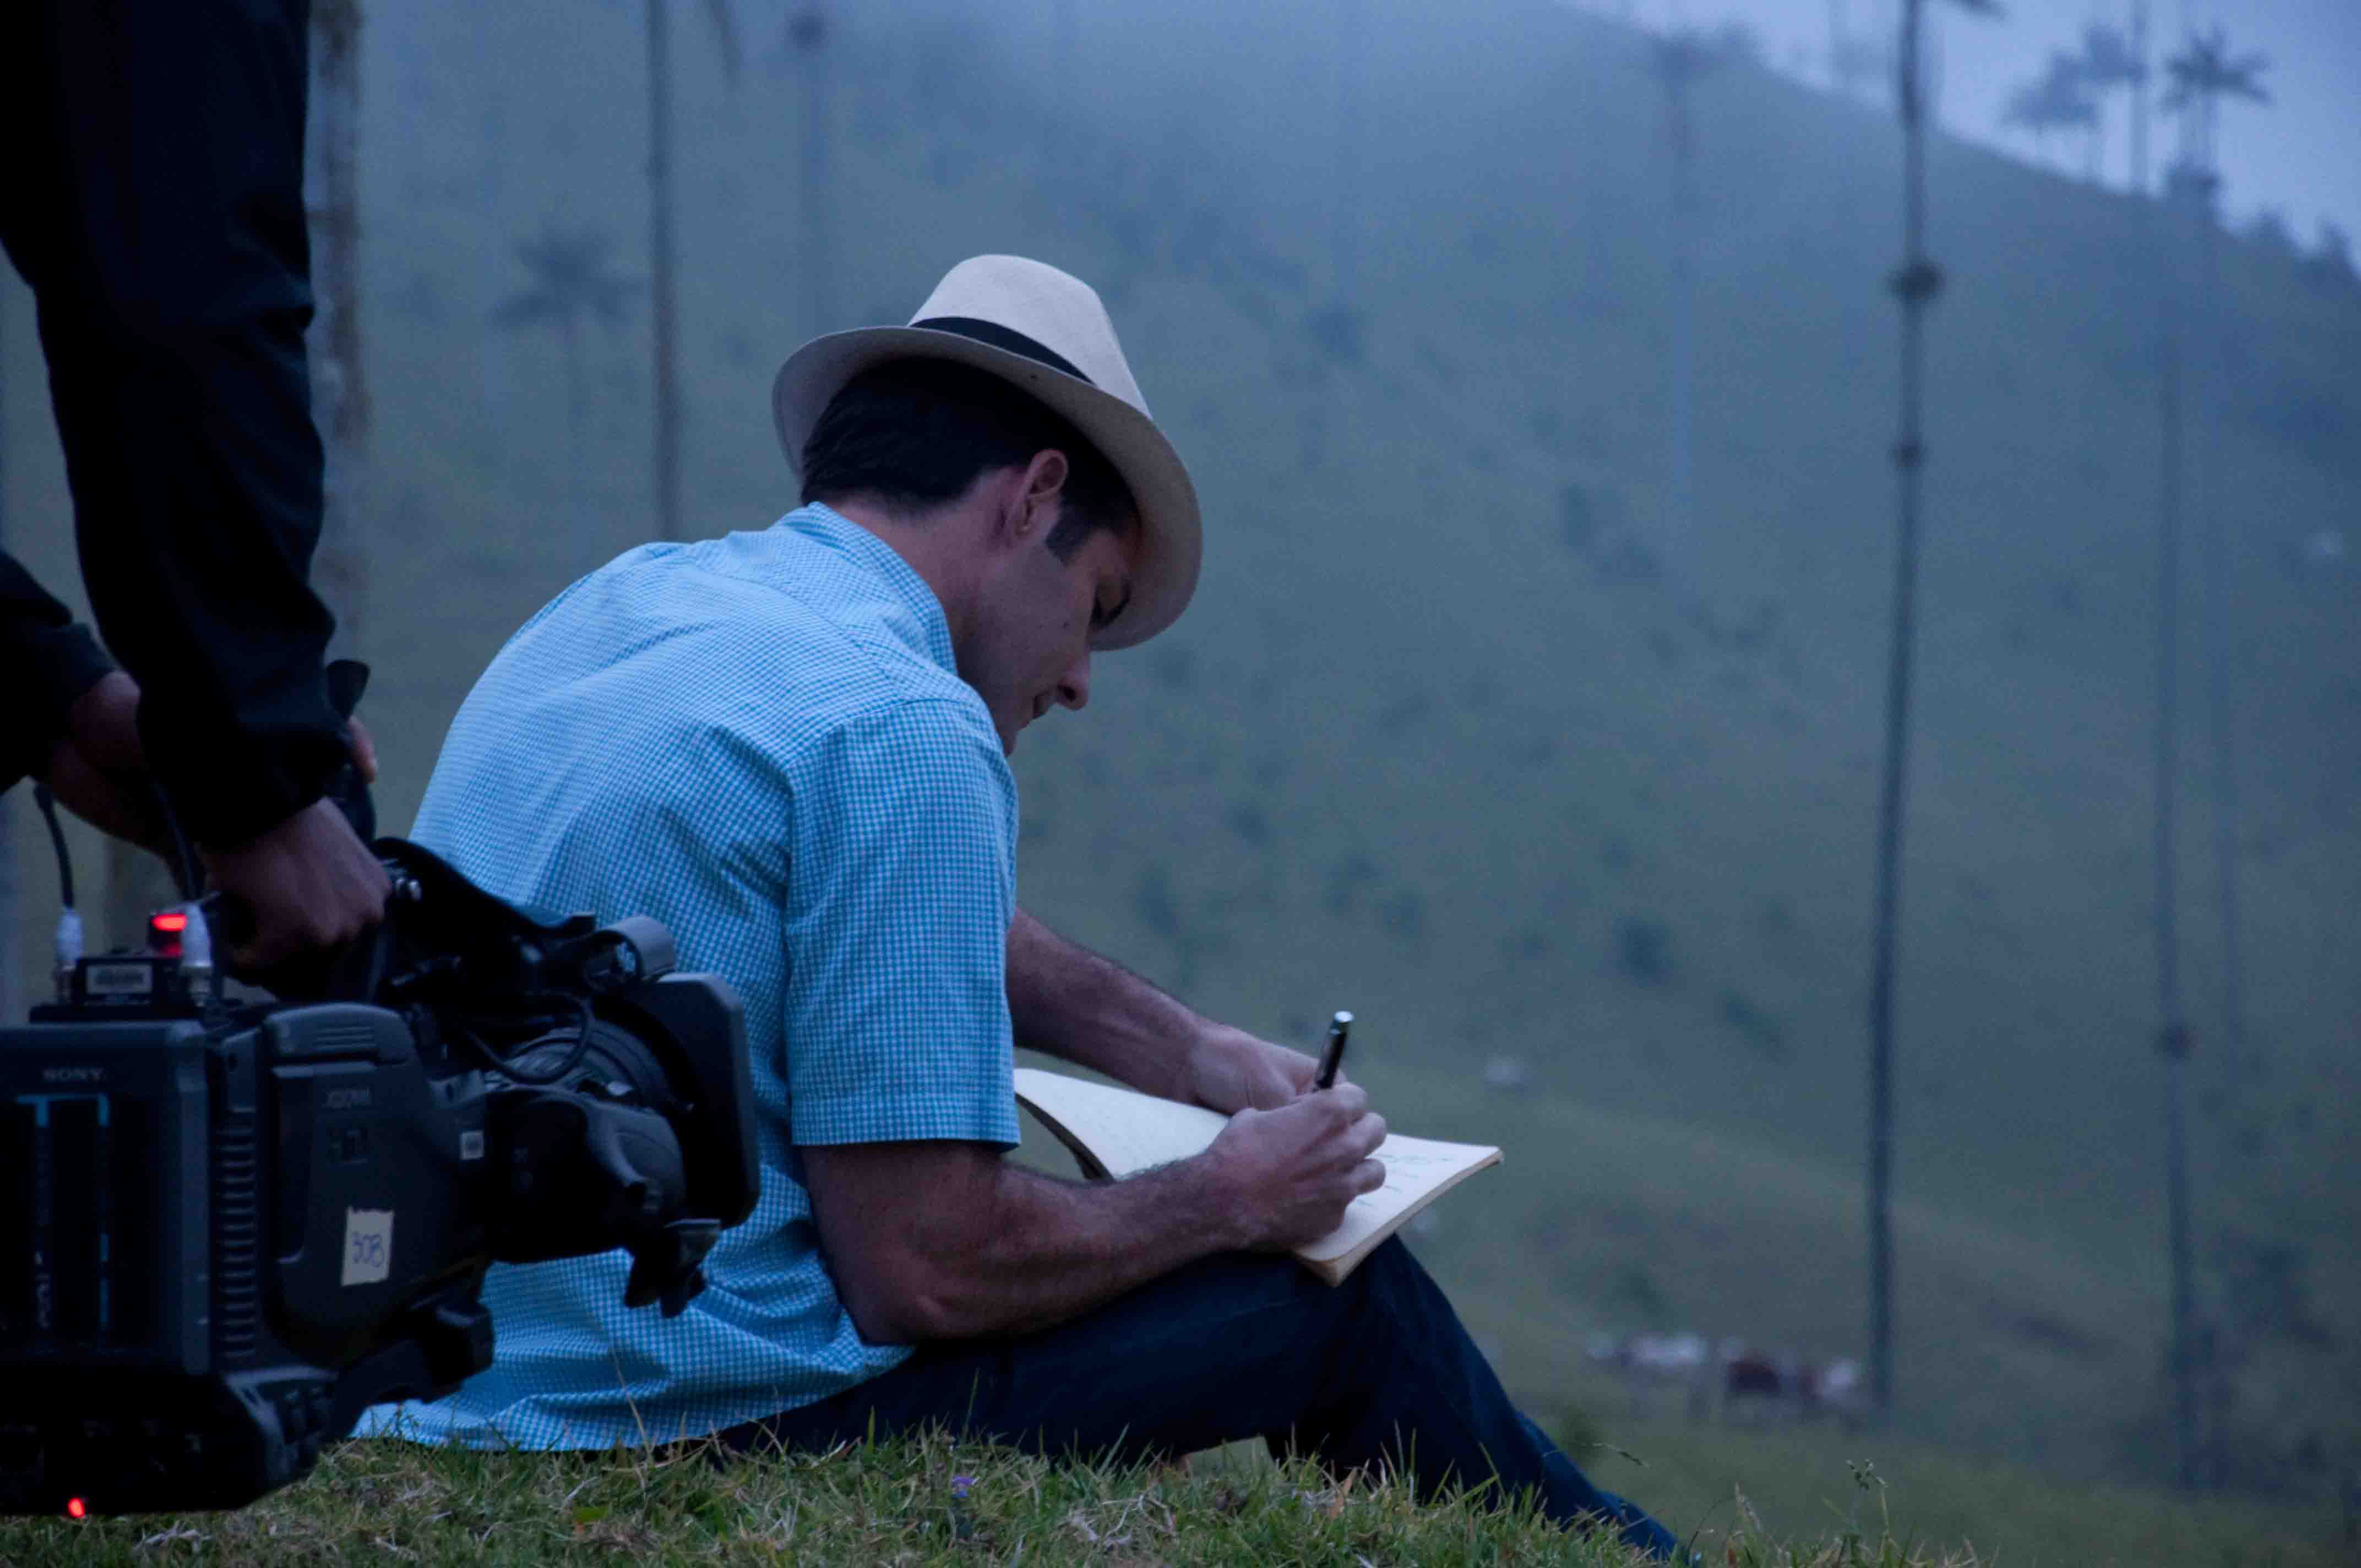 On location in Valle de Cocora, Colombia for 